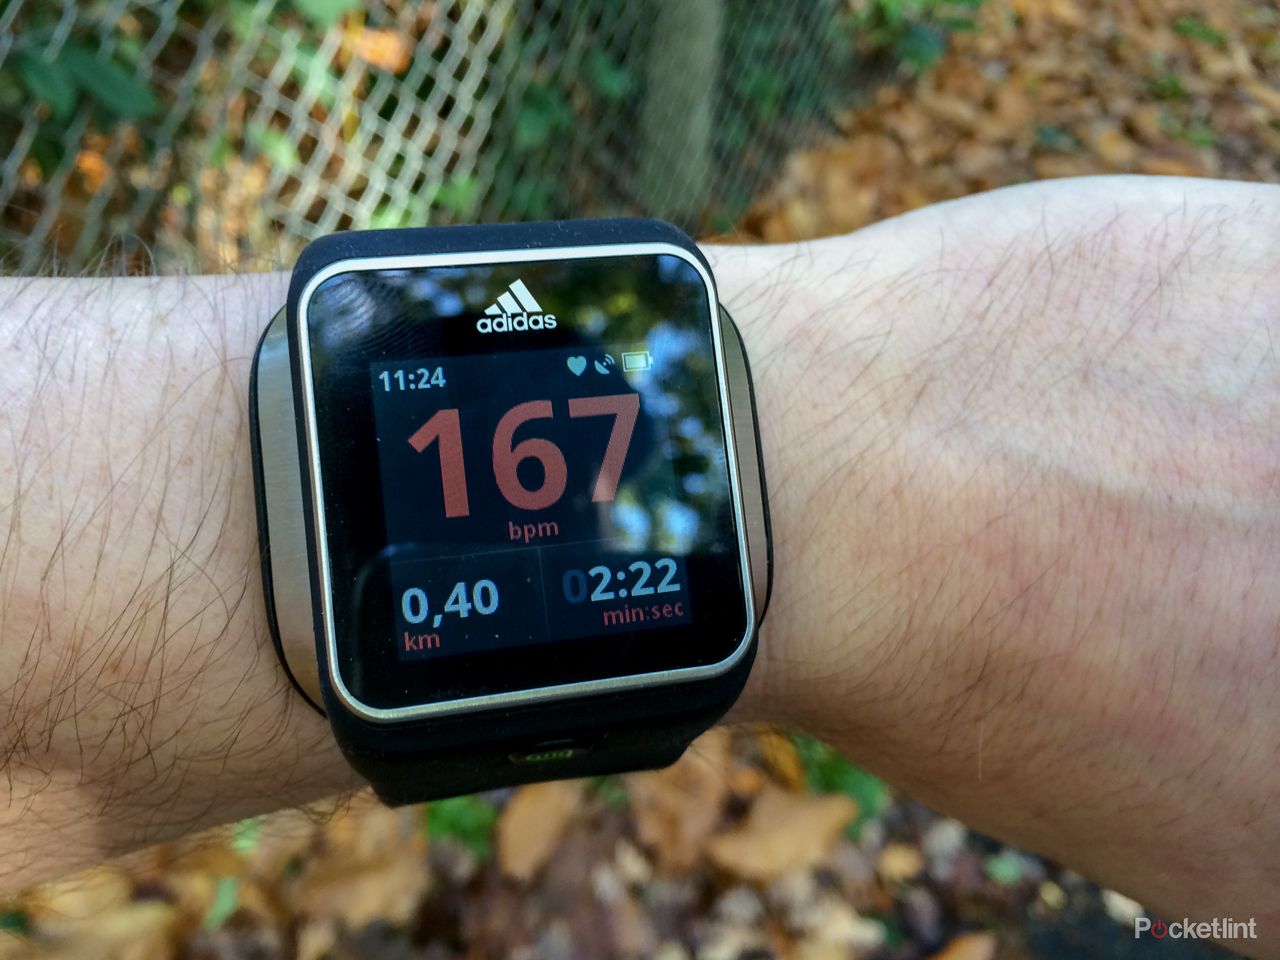 Adidas miCoach service shuts down as Runtastic takes over - Wareable